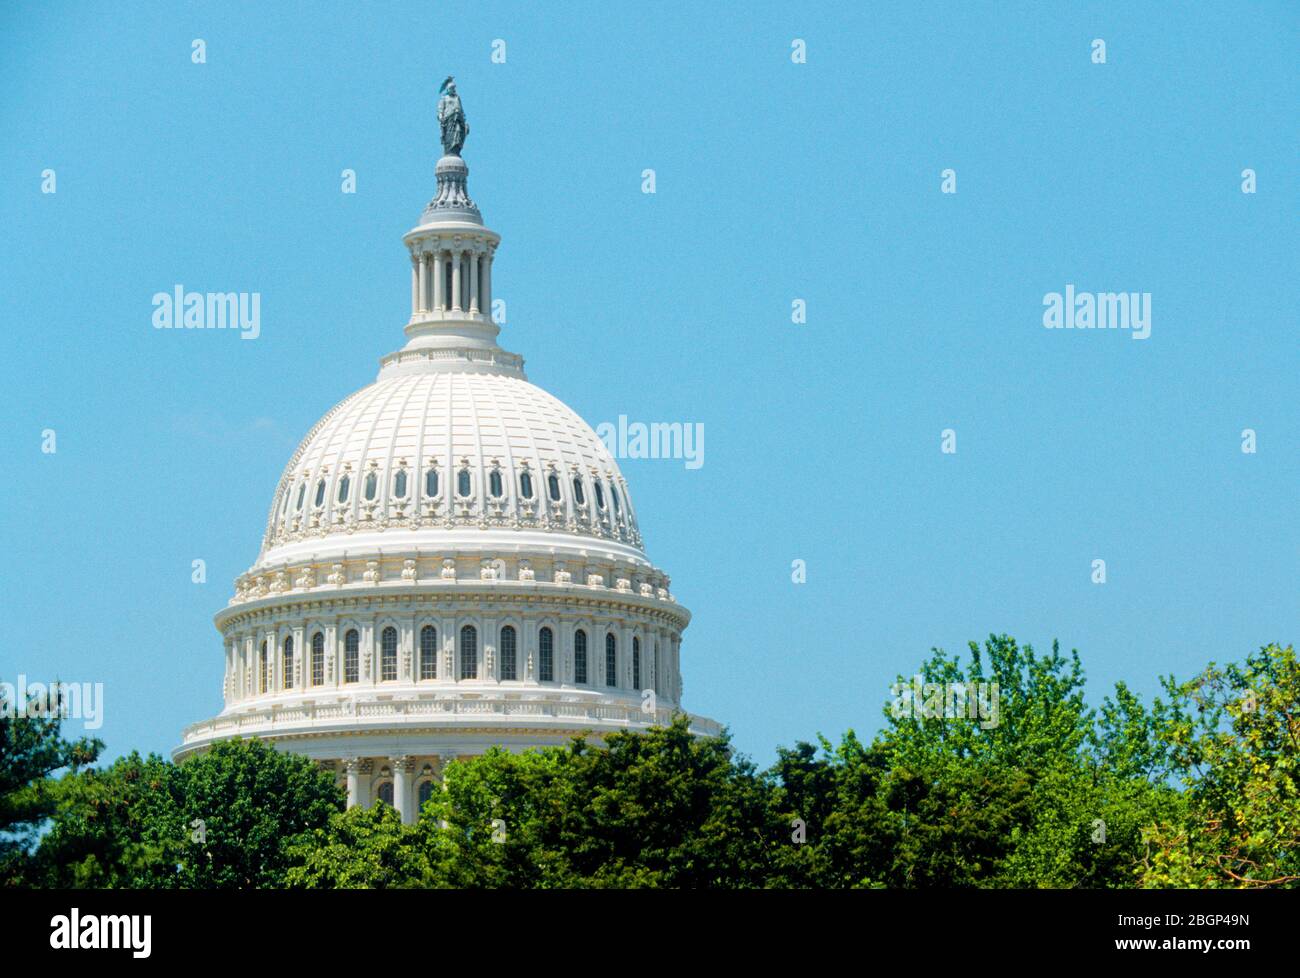 The magnificent dome on the United States Capitol or Capitol Building in the centre of Washington D.C. United States of America. The building is the h Stock Photo